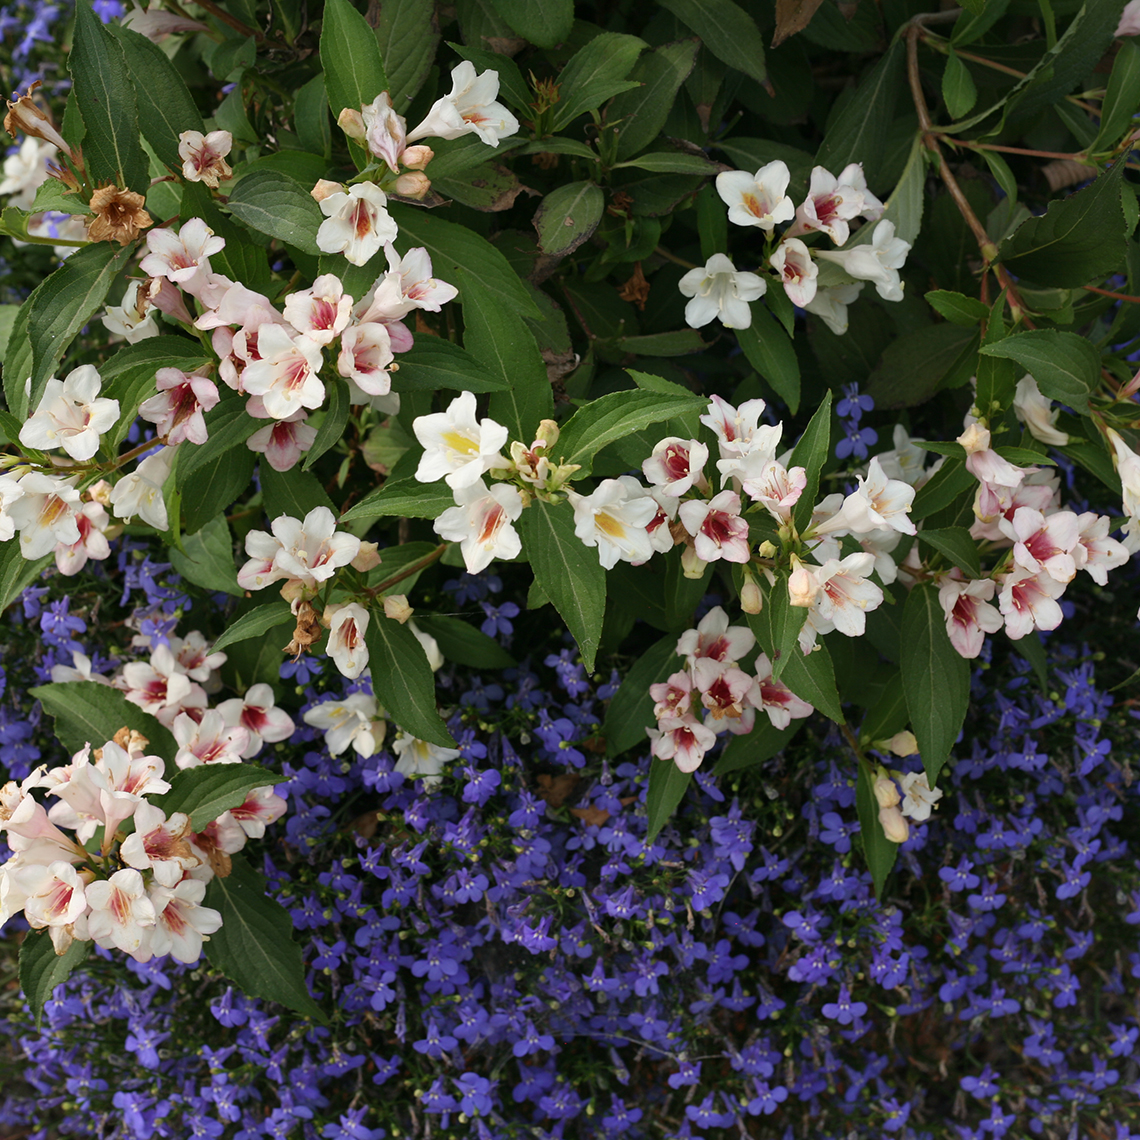 Detail of the flowers of Sonic Bloom Pearl weigela which are white yellow and pink against a planting of bright blue lobelia